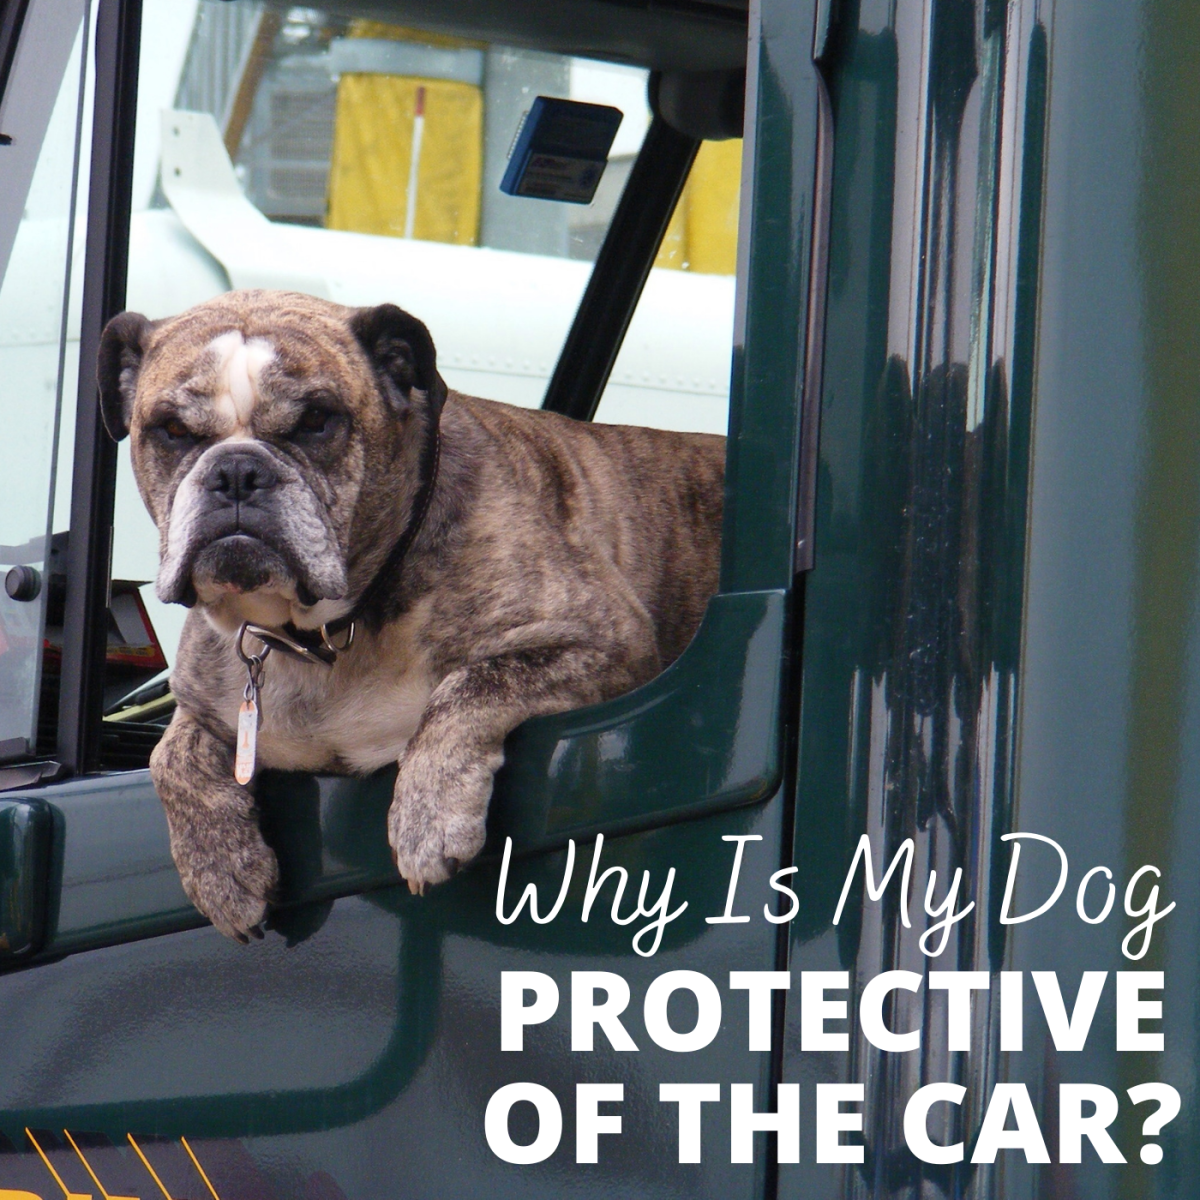 Does your dog bark when people come near your car? 